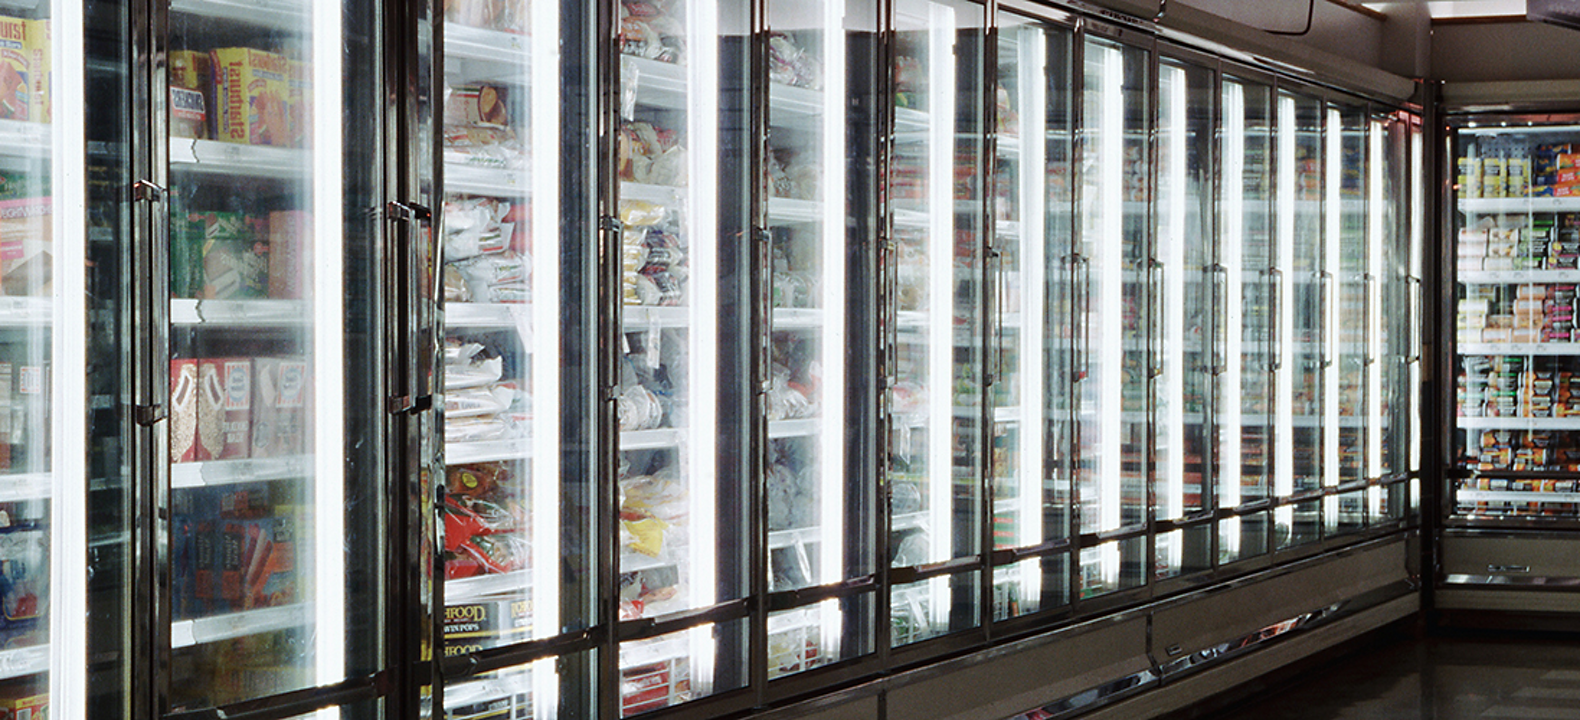 Rows of glass refrigerator/freezer units with inventory inside